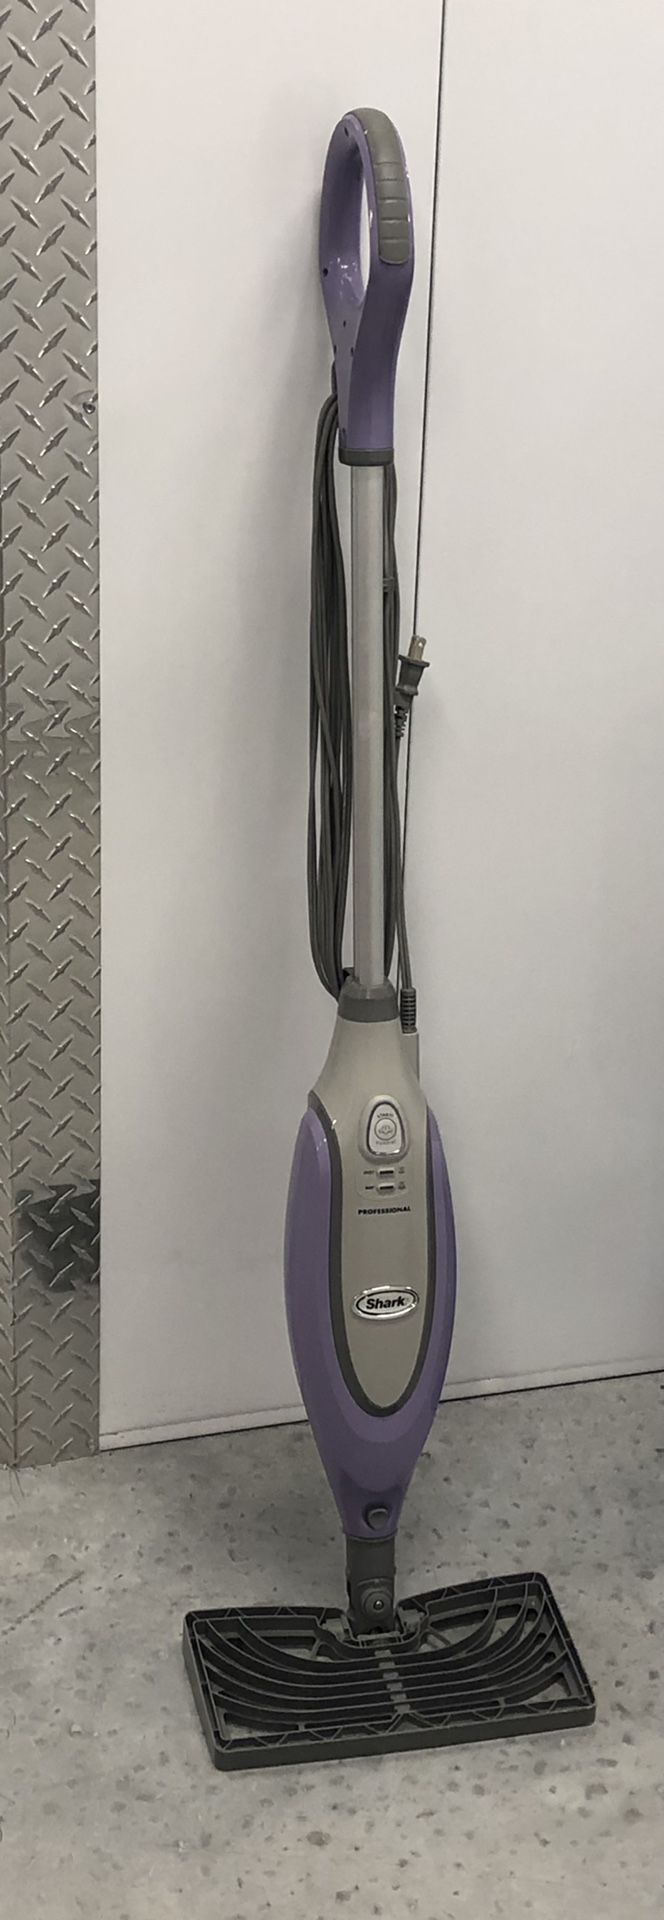 Like New Shark Steam Mop  Awesome For Any Kind Lf Floors Especially Wooden/Vinyl Flooring 